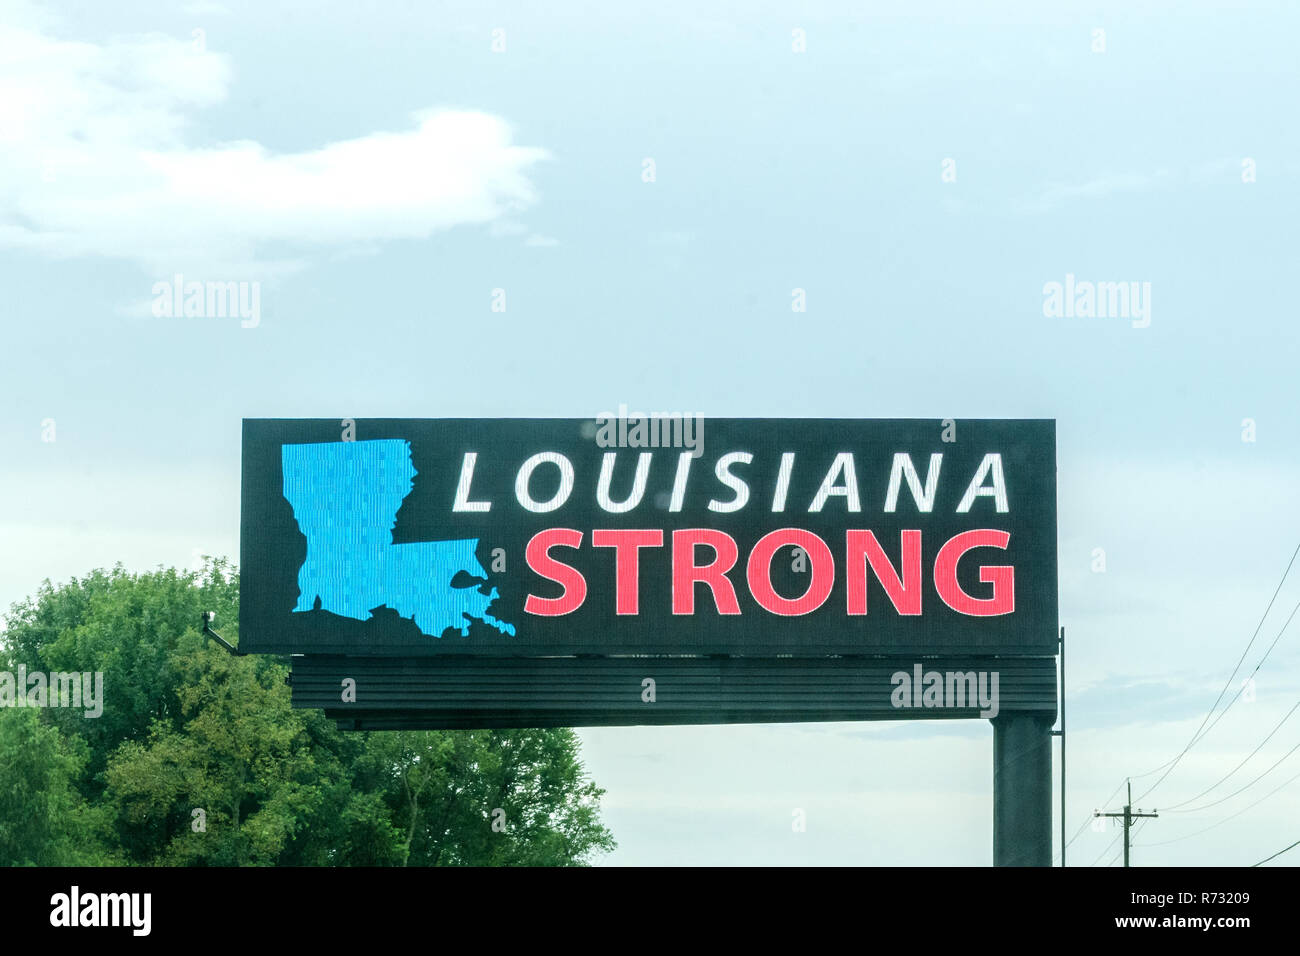 A sign reminds residents of Louisiana to stay strong after a flood, Aug. 25, 2016, in Gonzales, Louisiana. Stock Photo